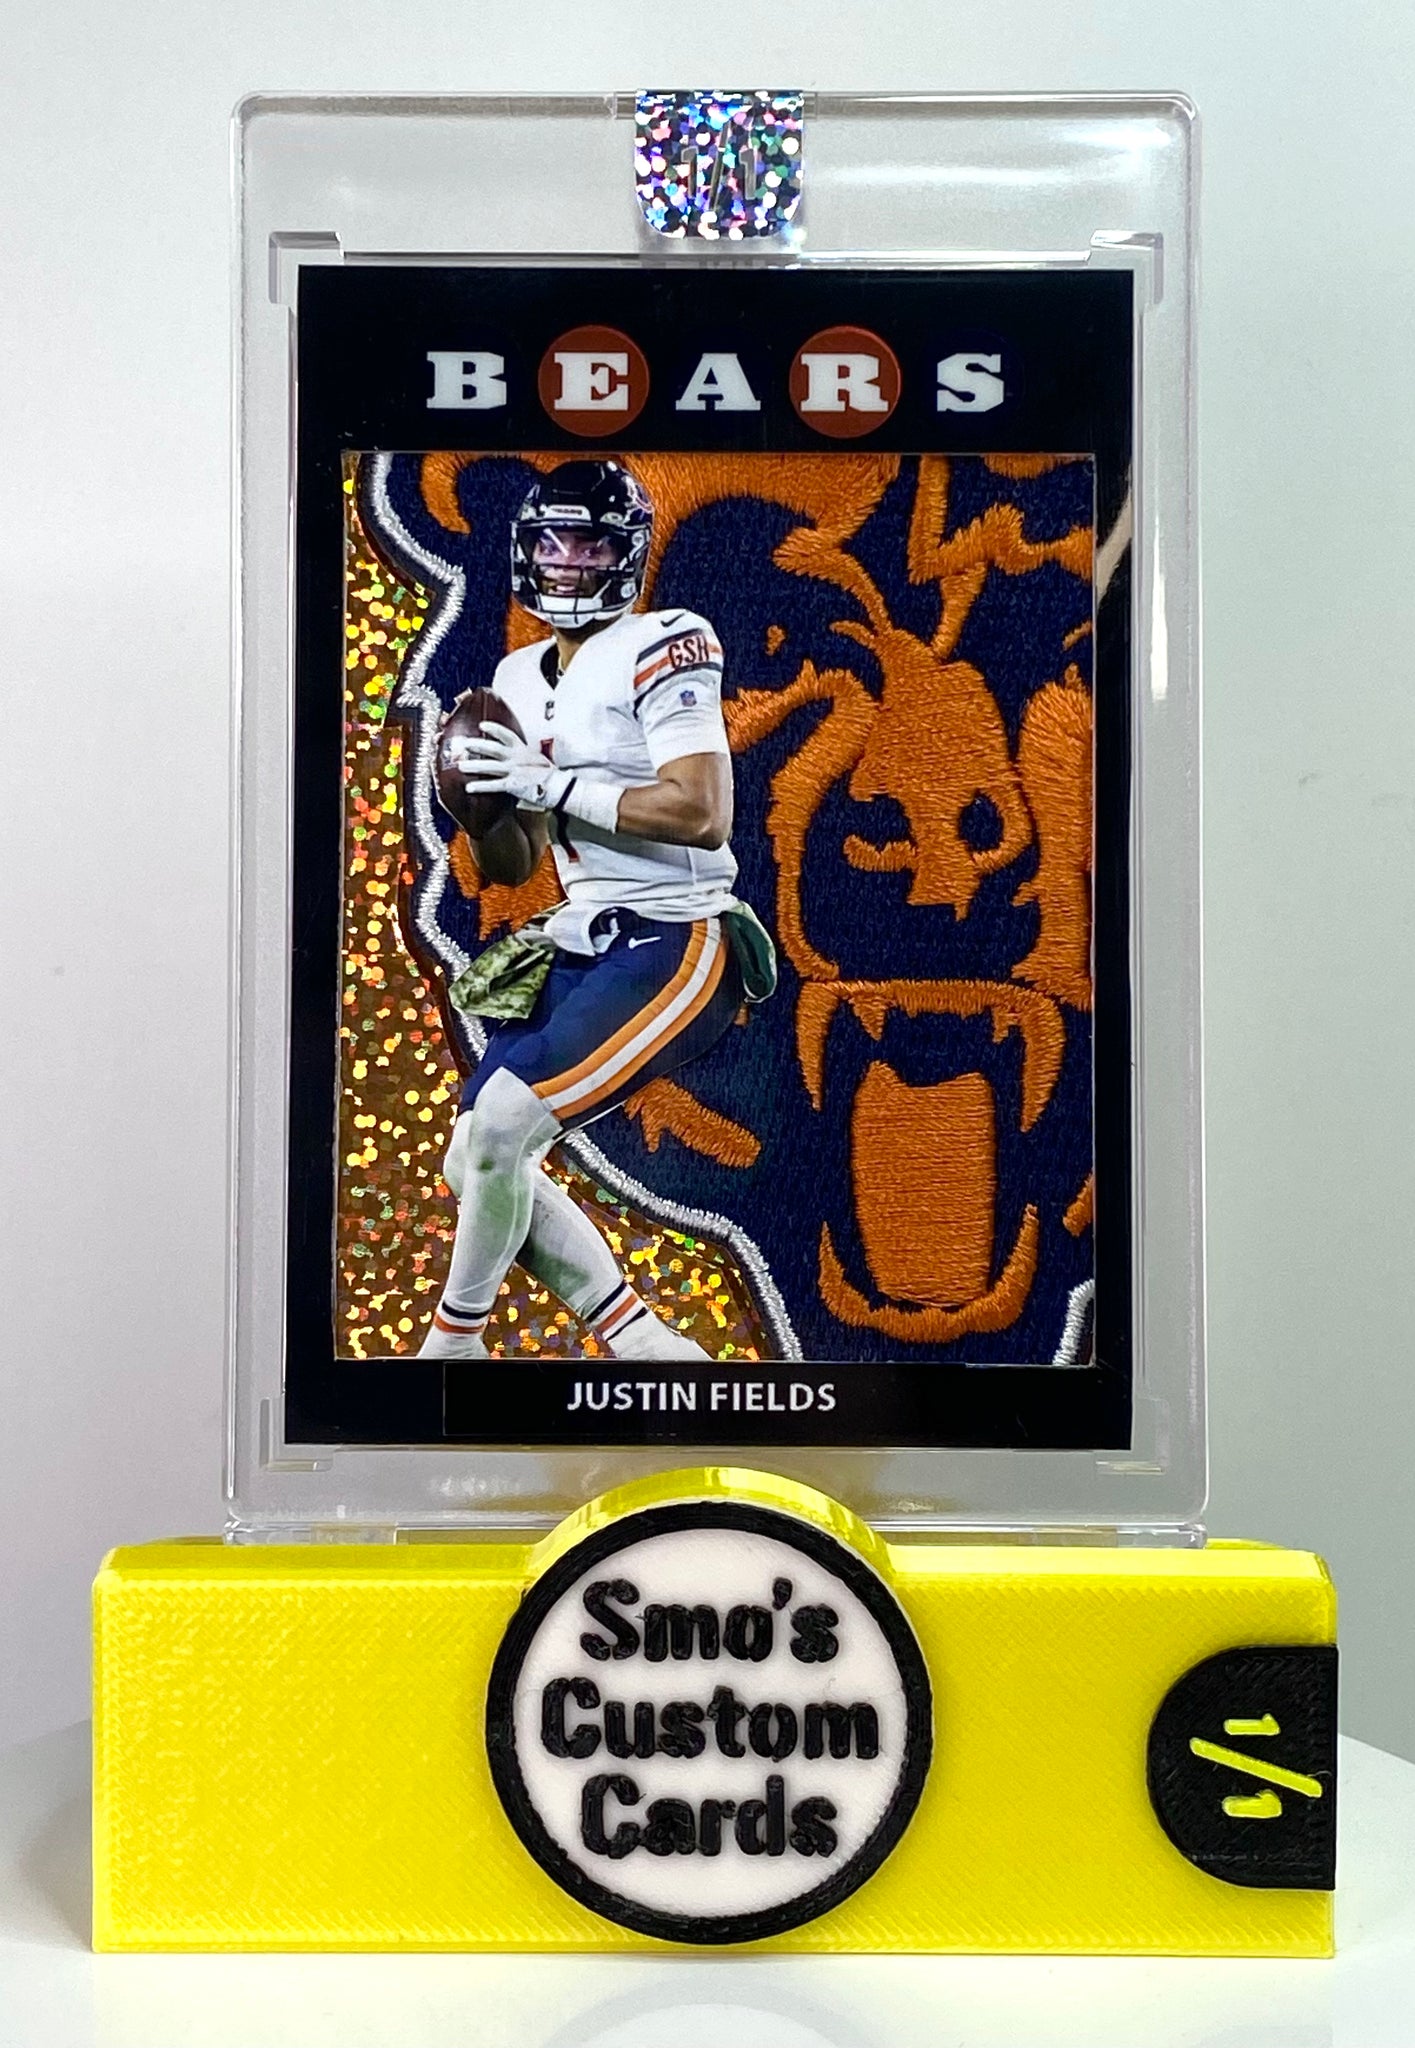 Justin Fields 2008 Topps Chrome Bears Patch 1/1